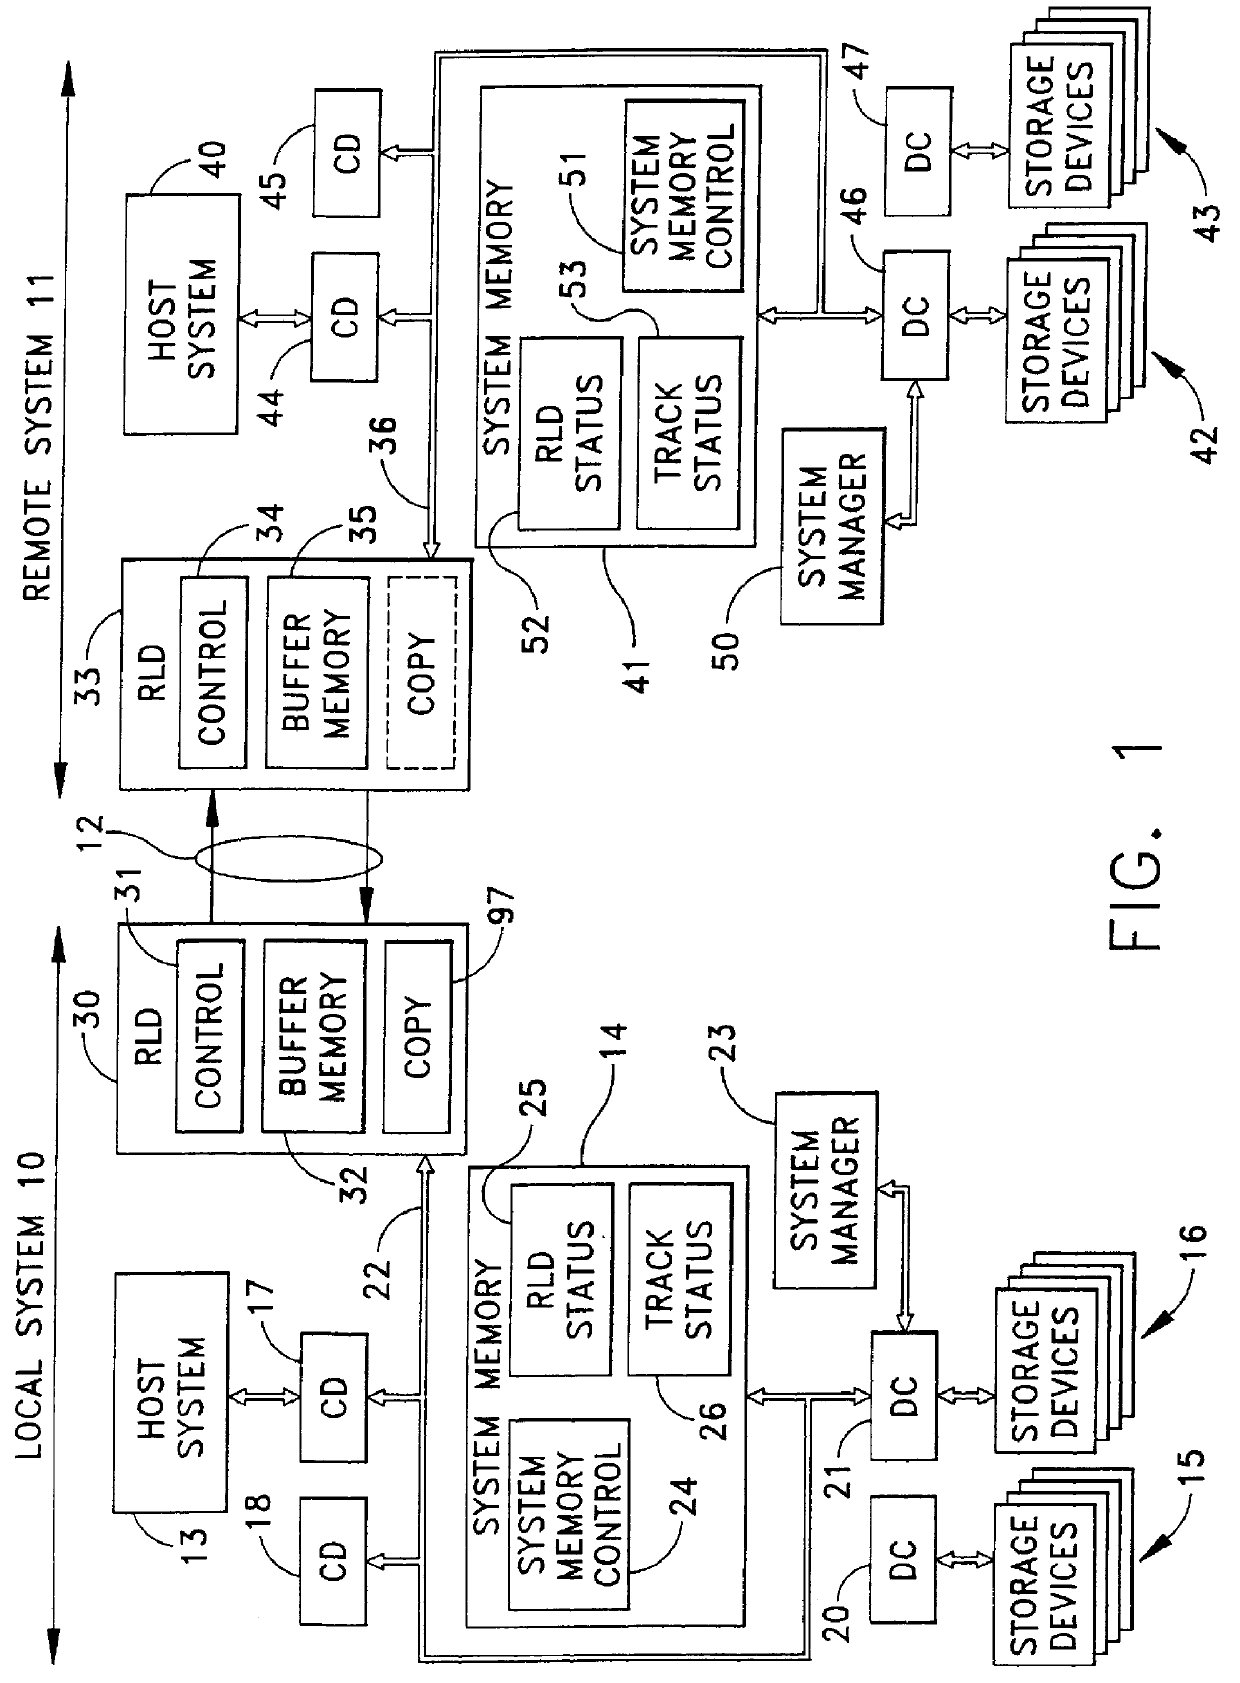 Method and apparatus for independent and simultaneous access to a common data set